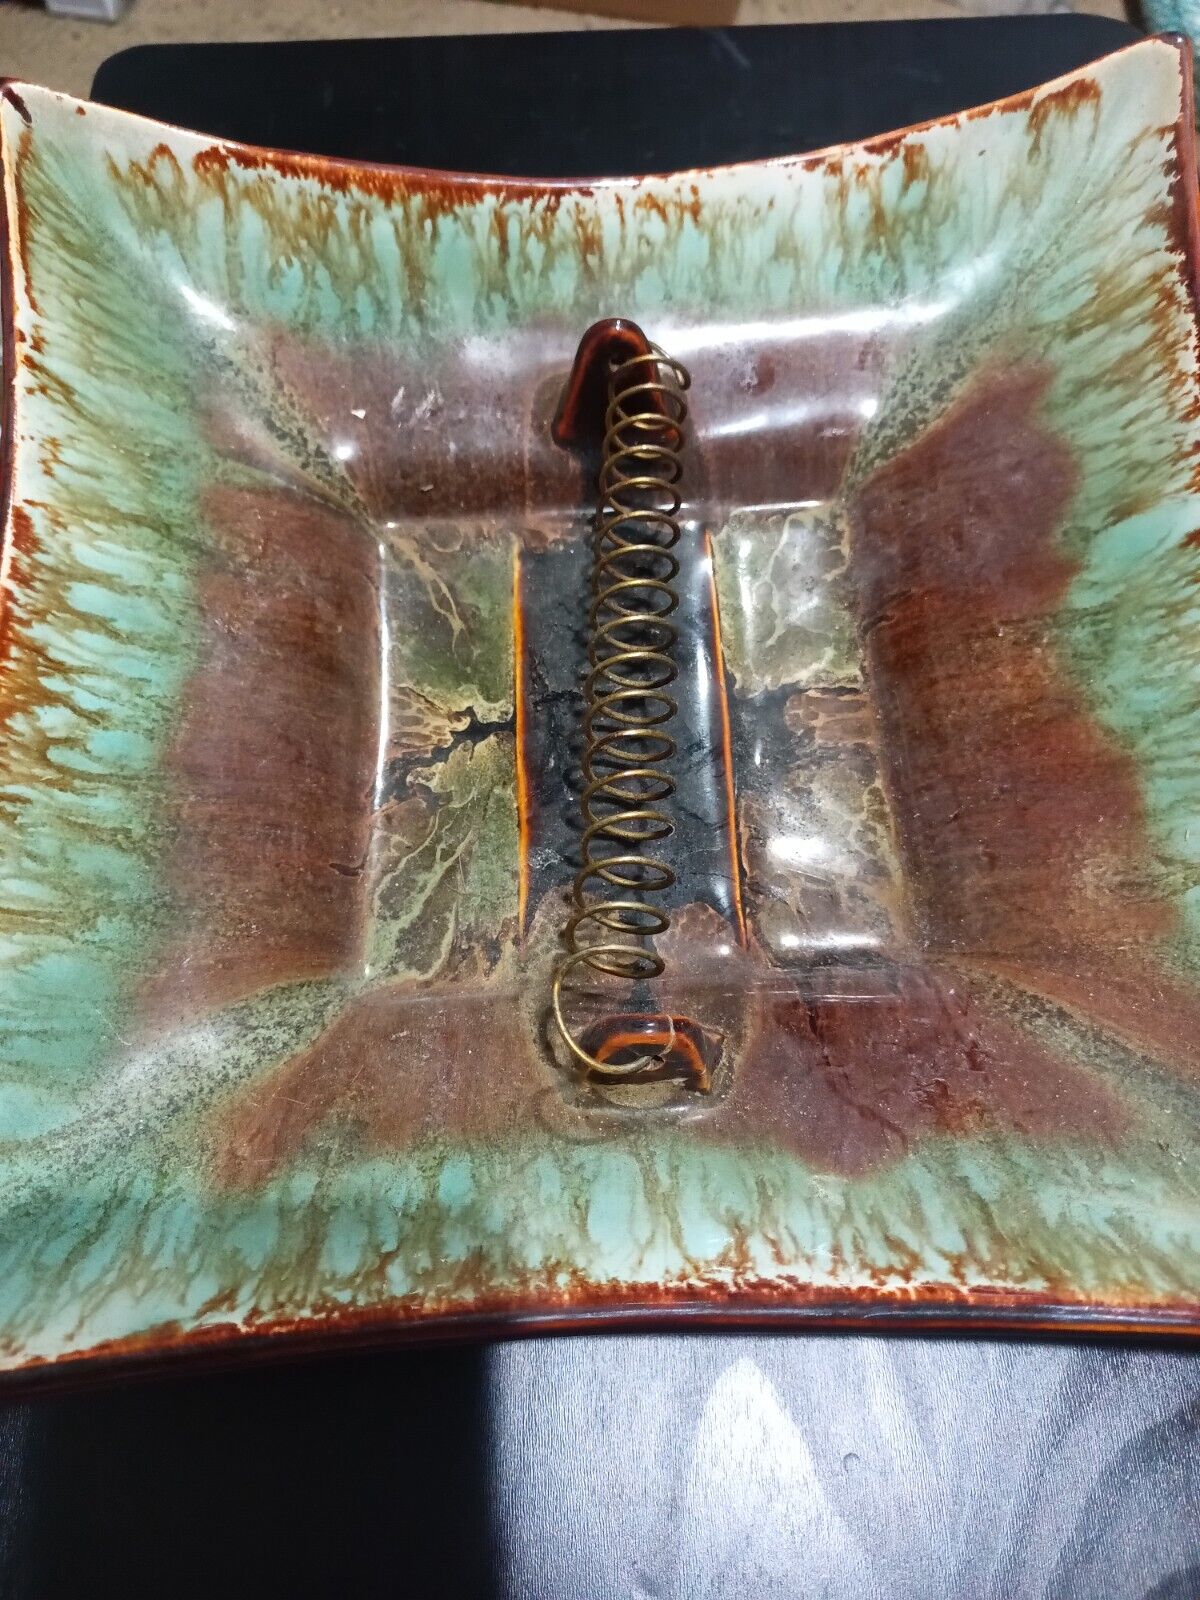 Vintage Brown and Green Glaze Ashtray With Copper Colored Coil; Mid Century